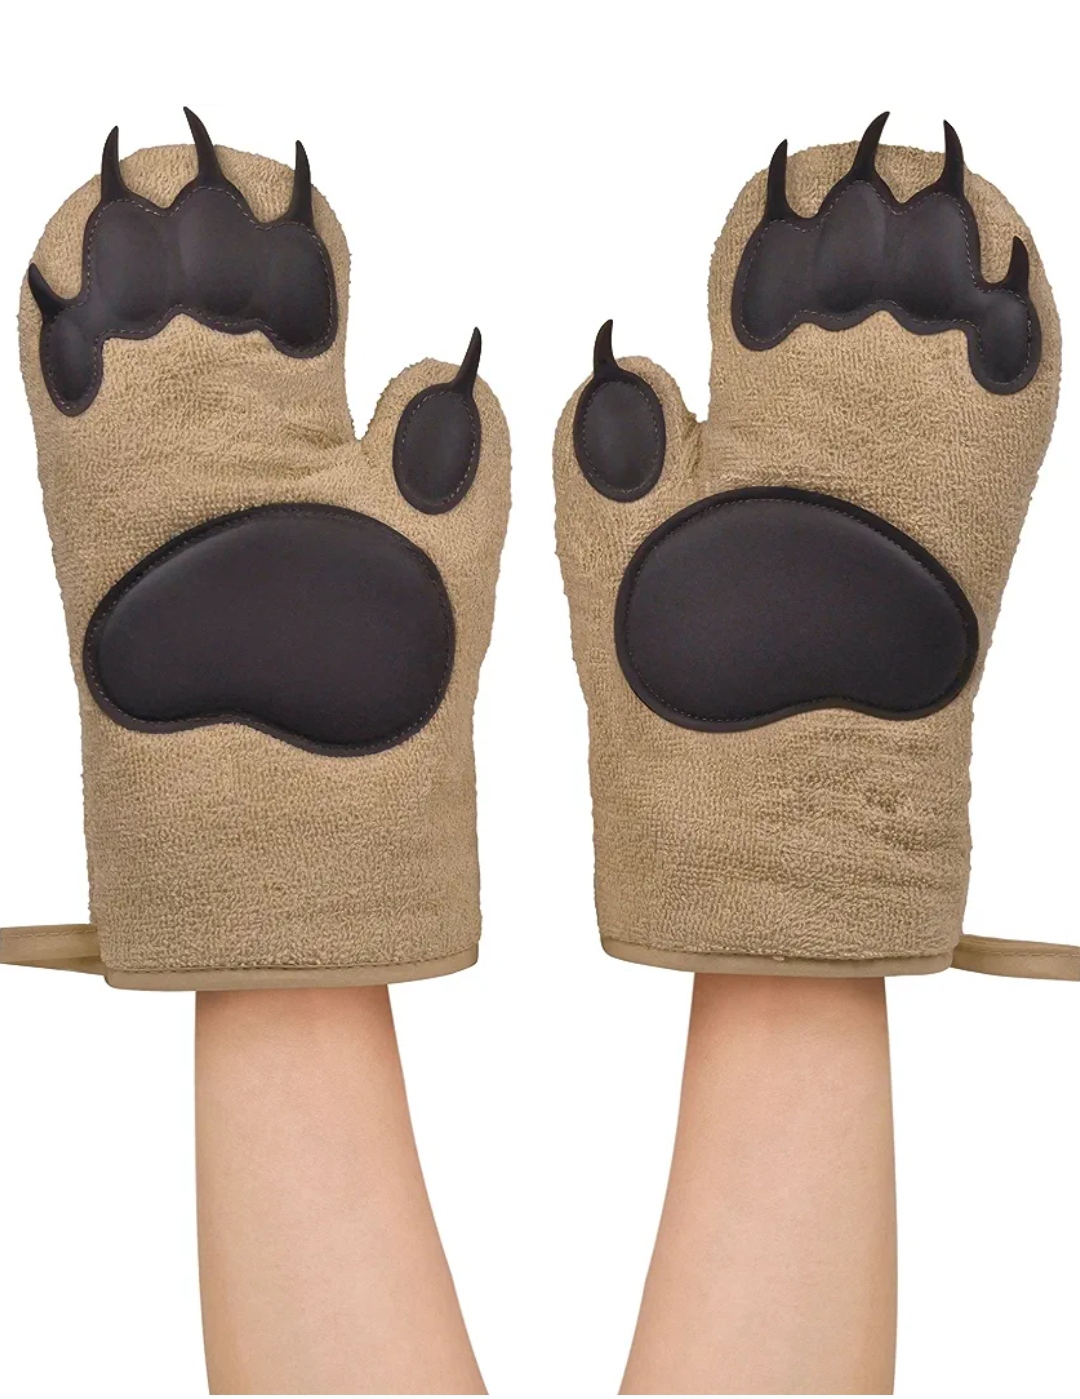 genuine fred oven mitts bear hands top 11 christmas gift for stepmoms you don't like